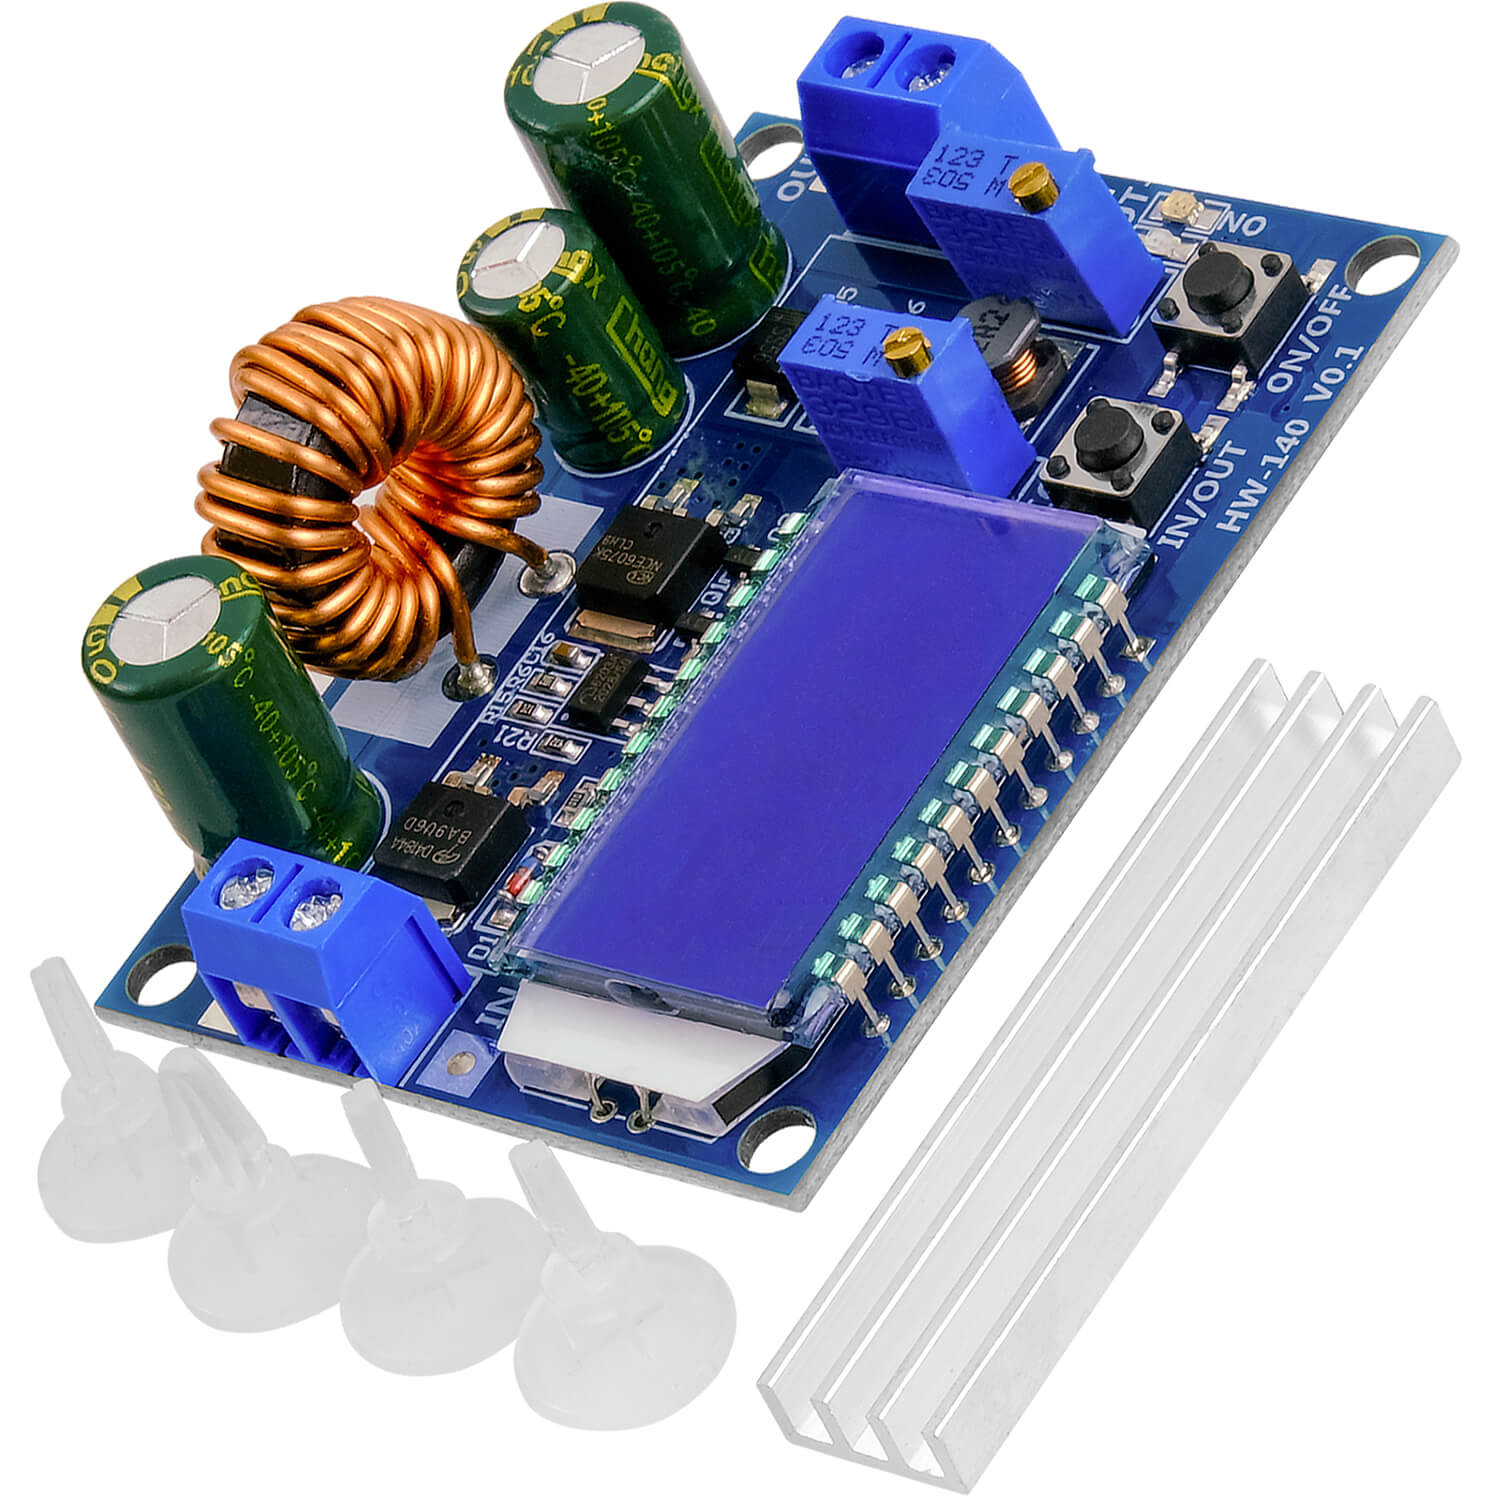 XL4016 Step-Down Buck Converter DC-DC compatible with Arduino